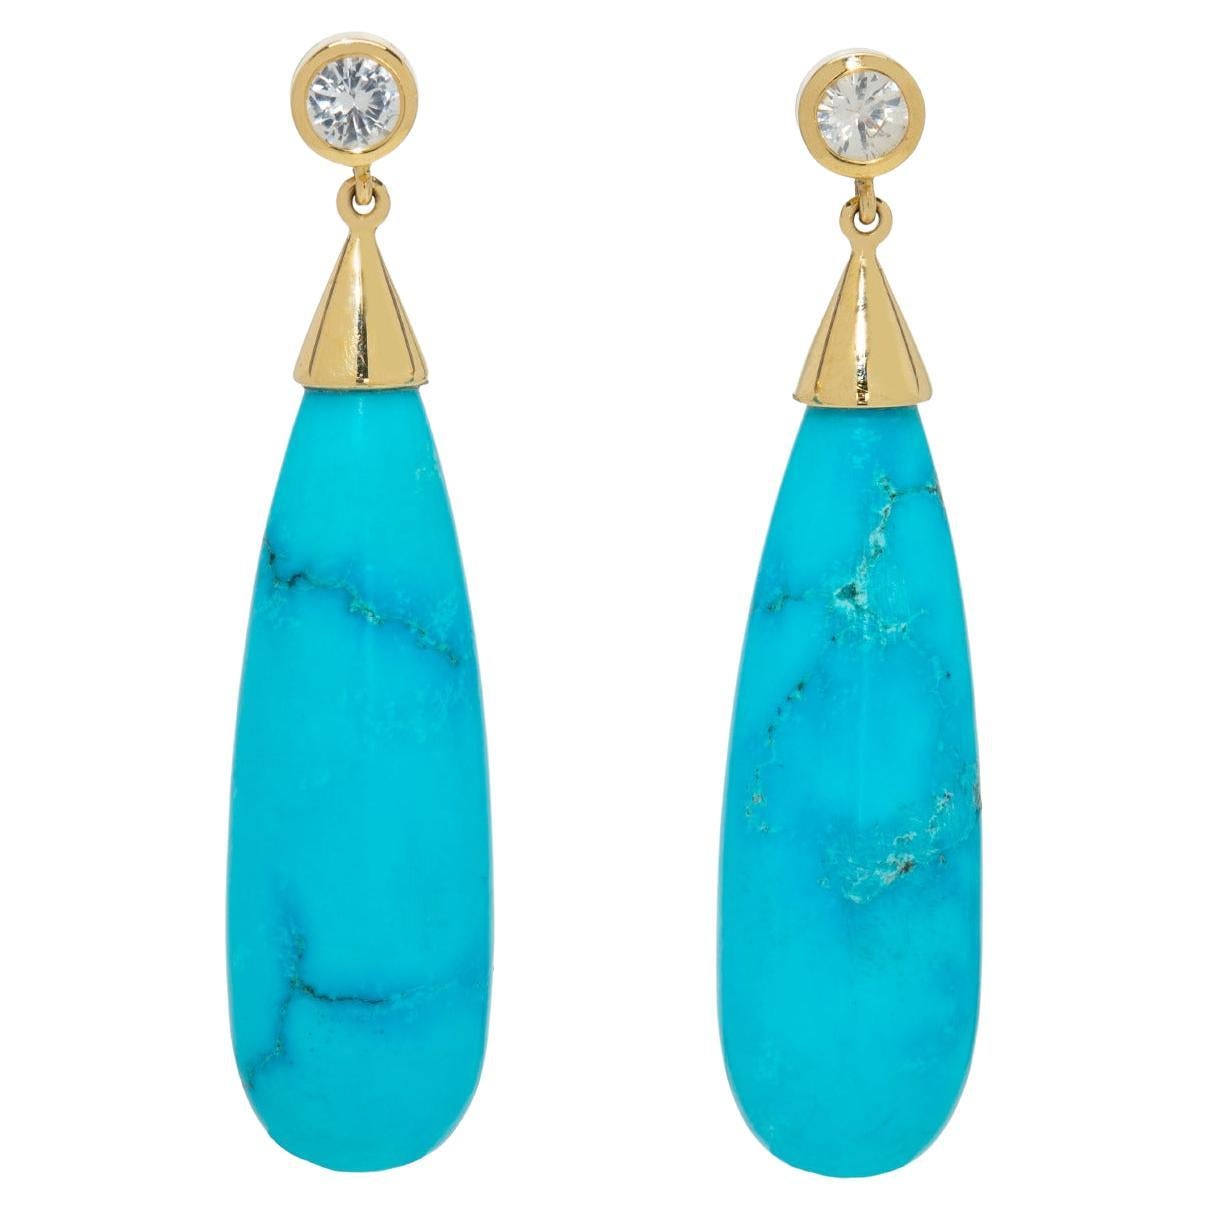 18 Karat Gold Earrings with Turquoise Drops and White Sapphires, by Gloria Bass